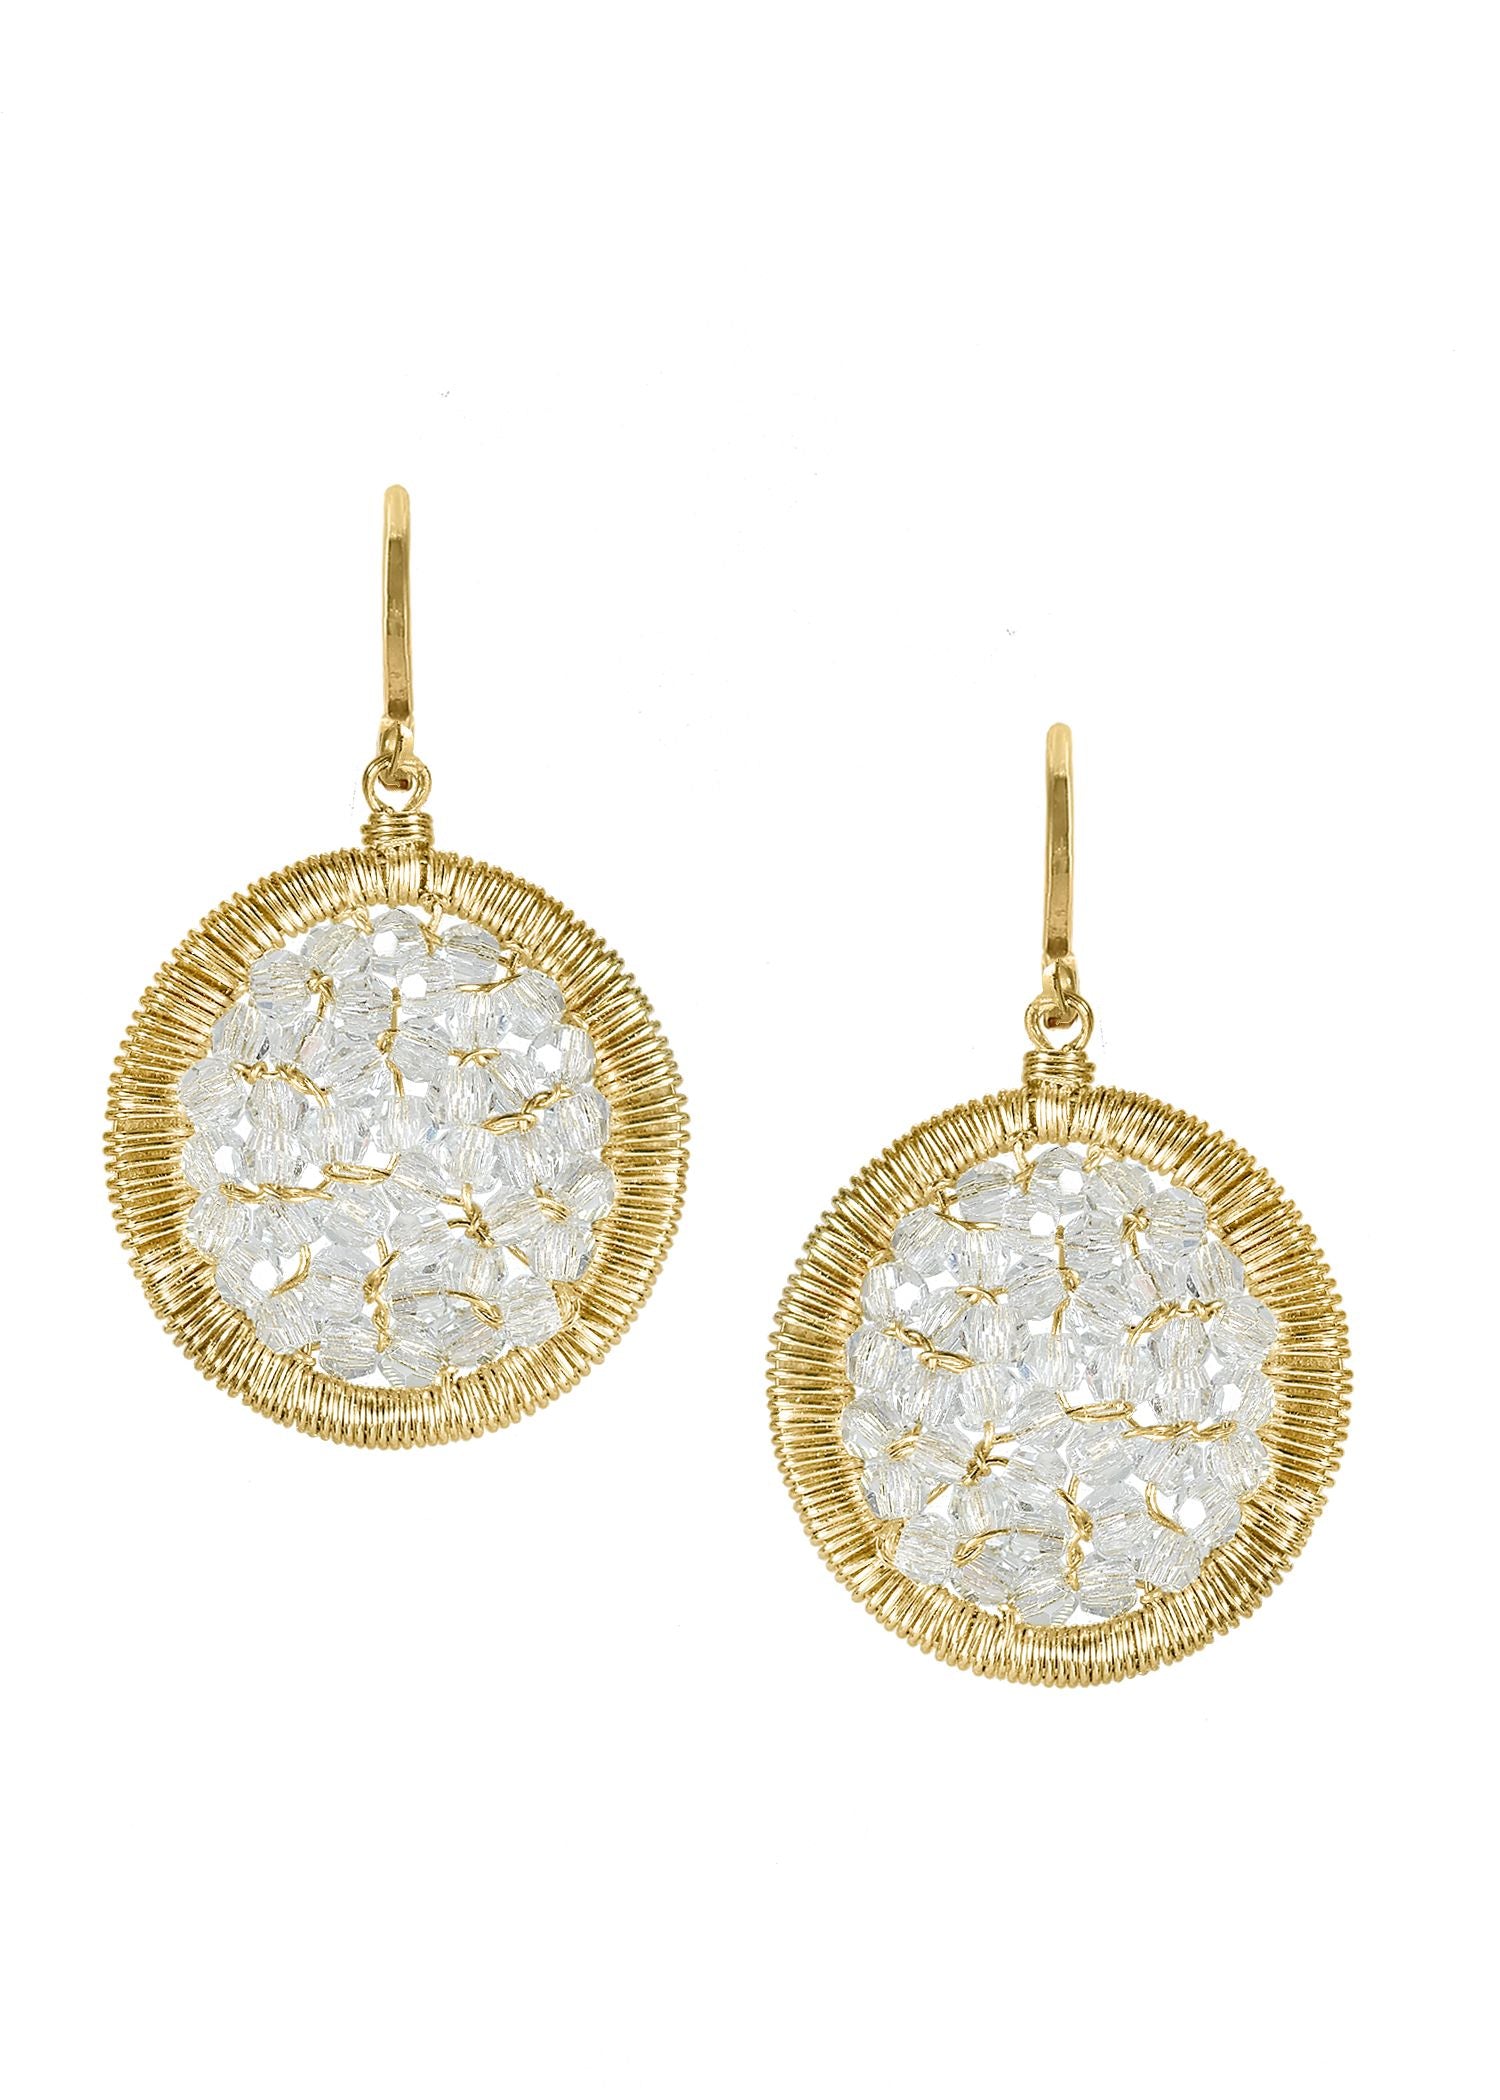 Crystal 14k gold fill Earrings measure 1-3/16" in length (including the ear wires) and 5/8" in width Handmade in our Los Angeles studio